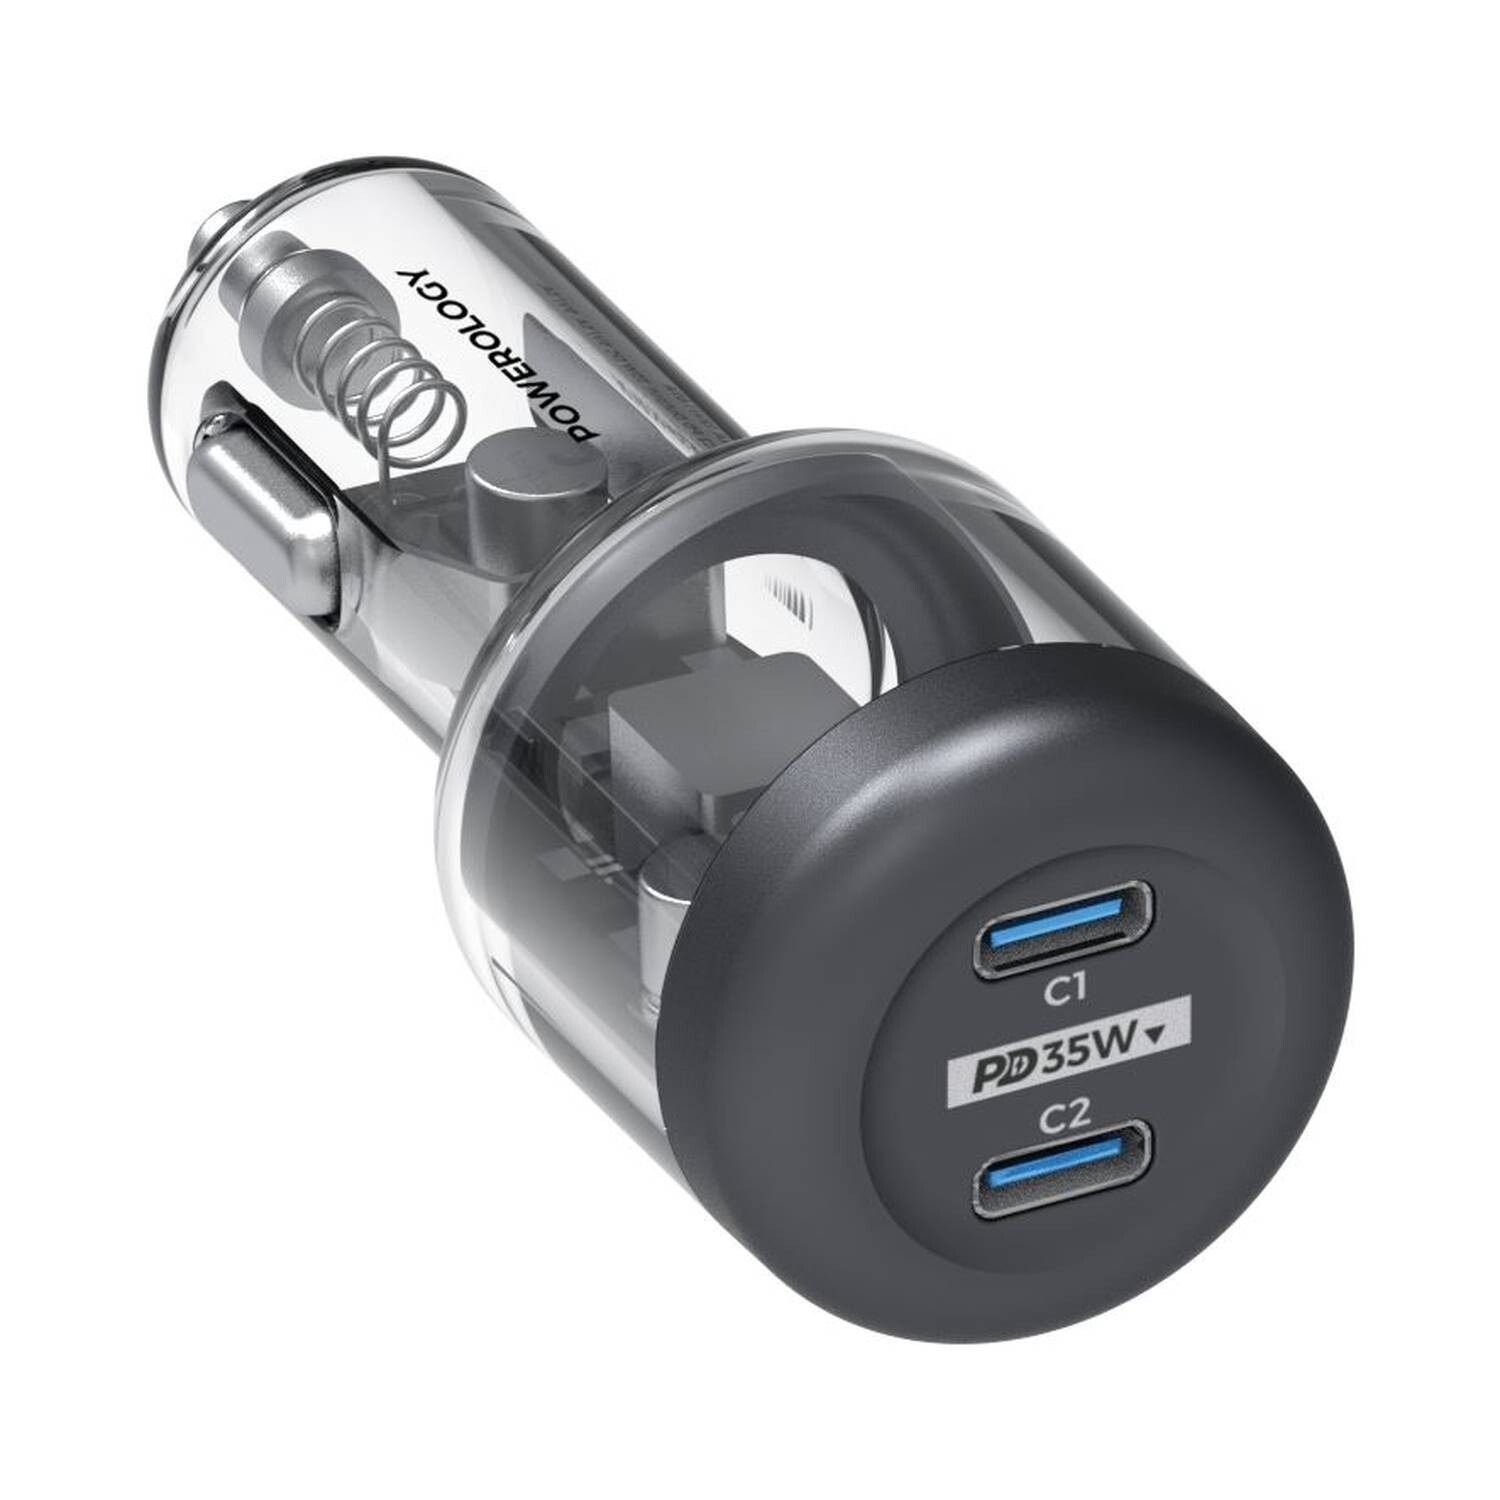 Powerology Ultra-Quick Crystalline Series Car Charger PD 35W